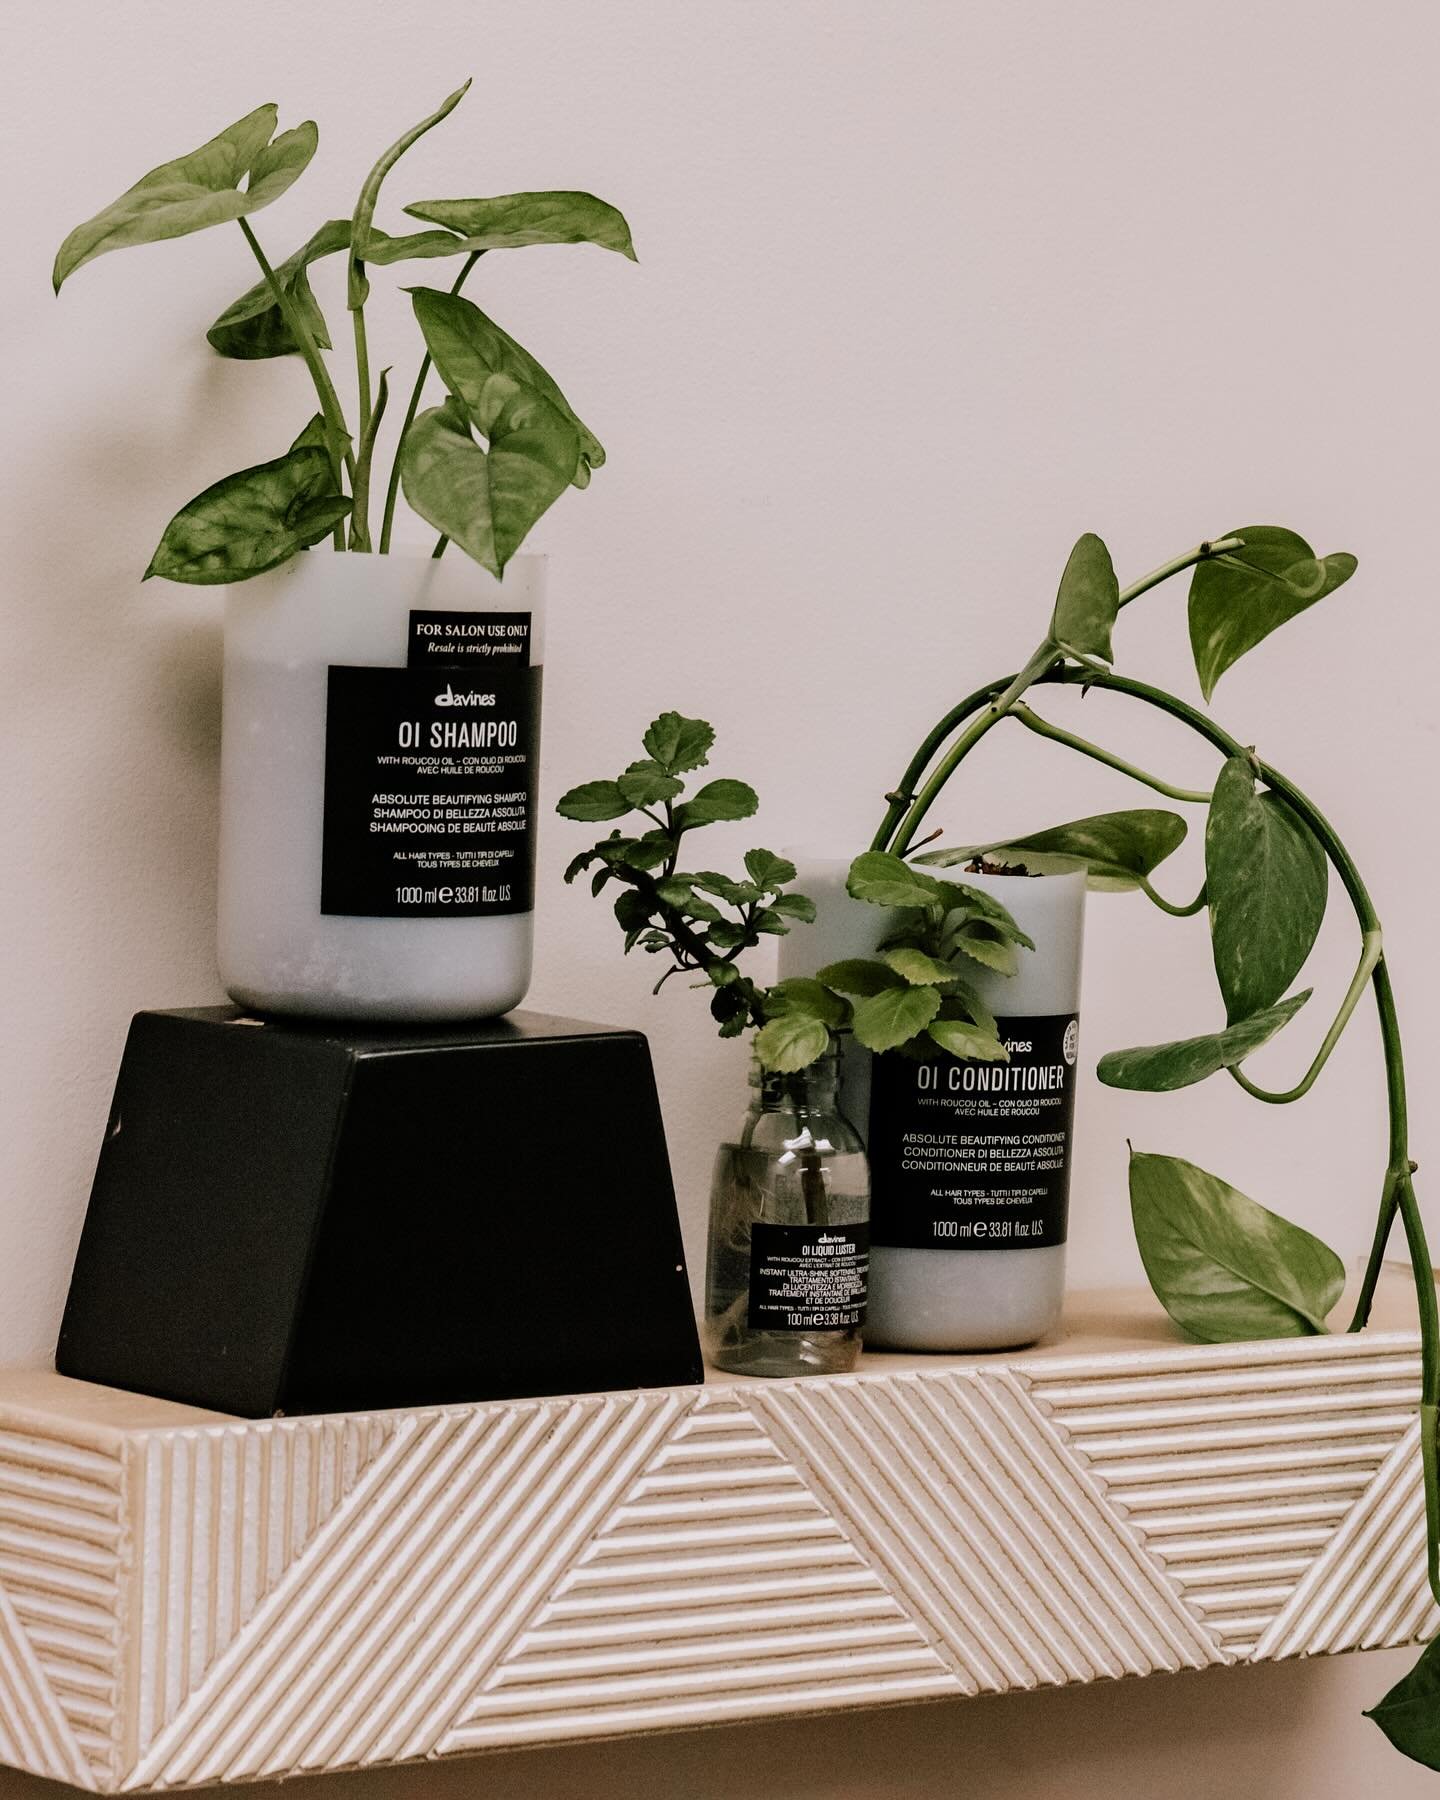 Happy Earth Day! Let&rsquo;s celebrate with a plant giveaway!! We have lots of propagated plants around the salon ready for YOU to take home. Stop by or pick one up at your appointment today. 

How to pot a propagated plant: transfer into soil that h